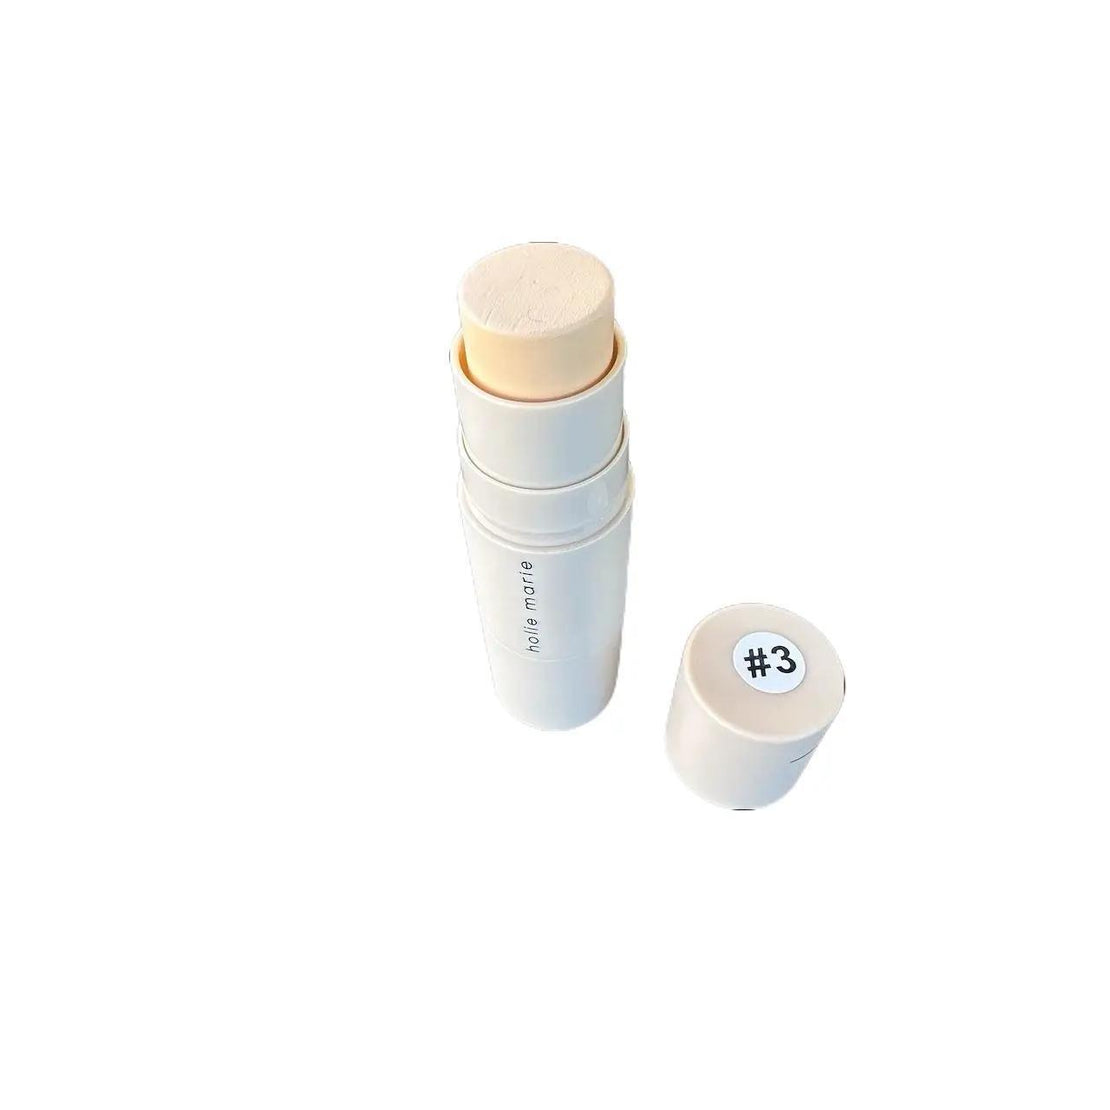 Concealer Stick with brush 0016 Long-lasting